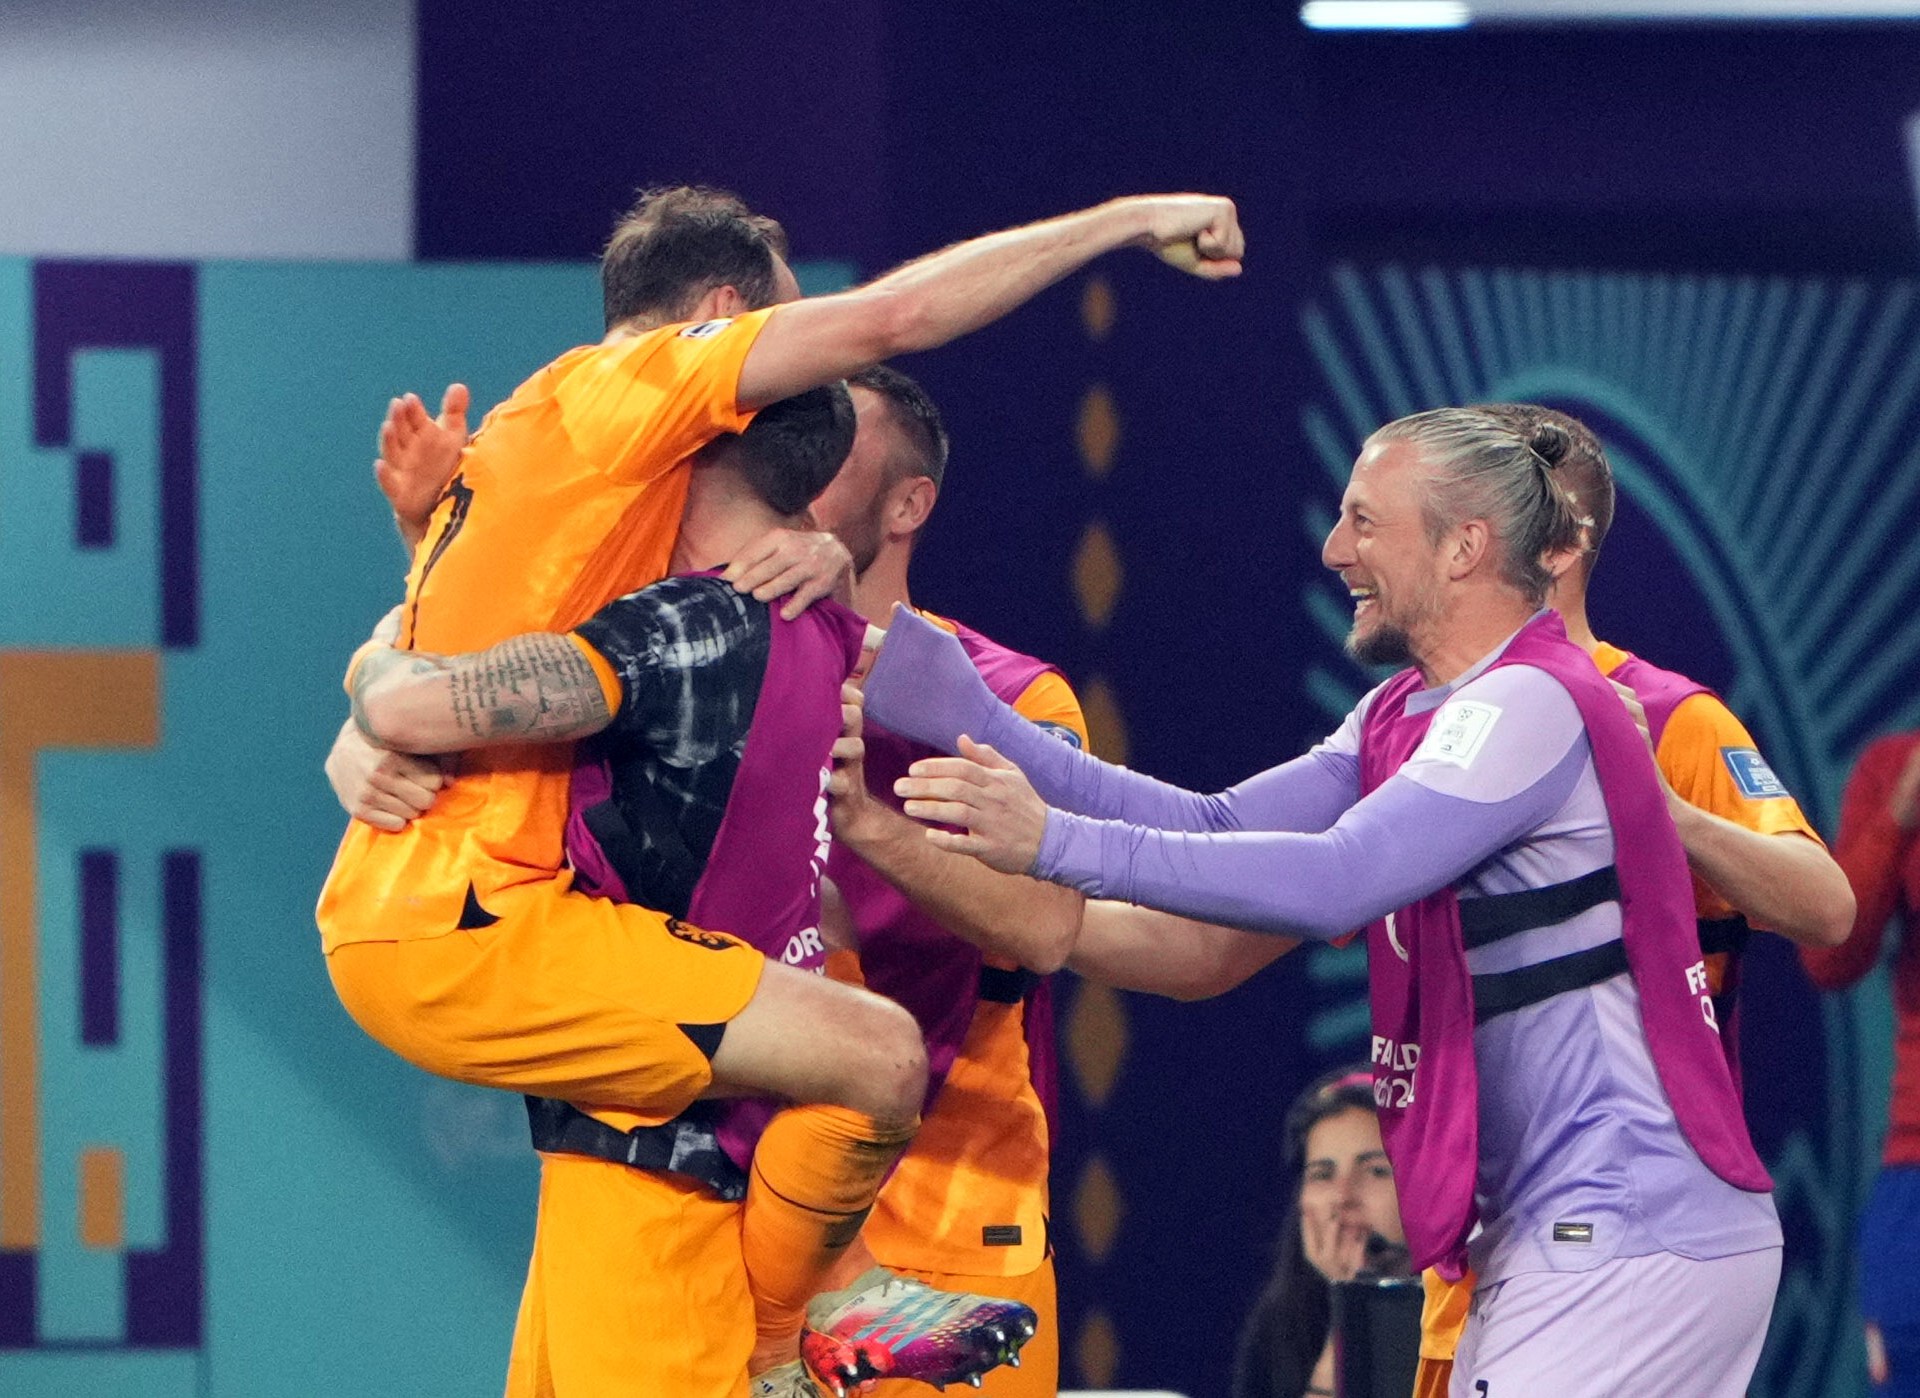 Netherlands dominate USA in first knock-out World Cup match